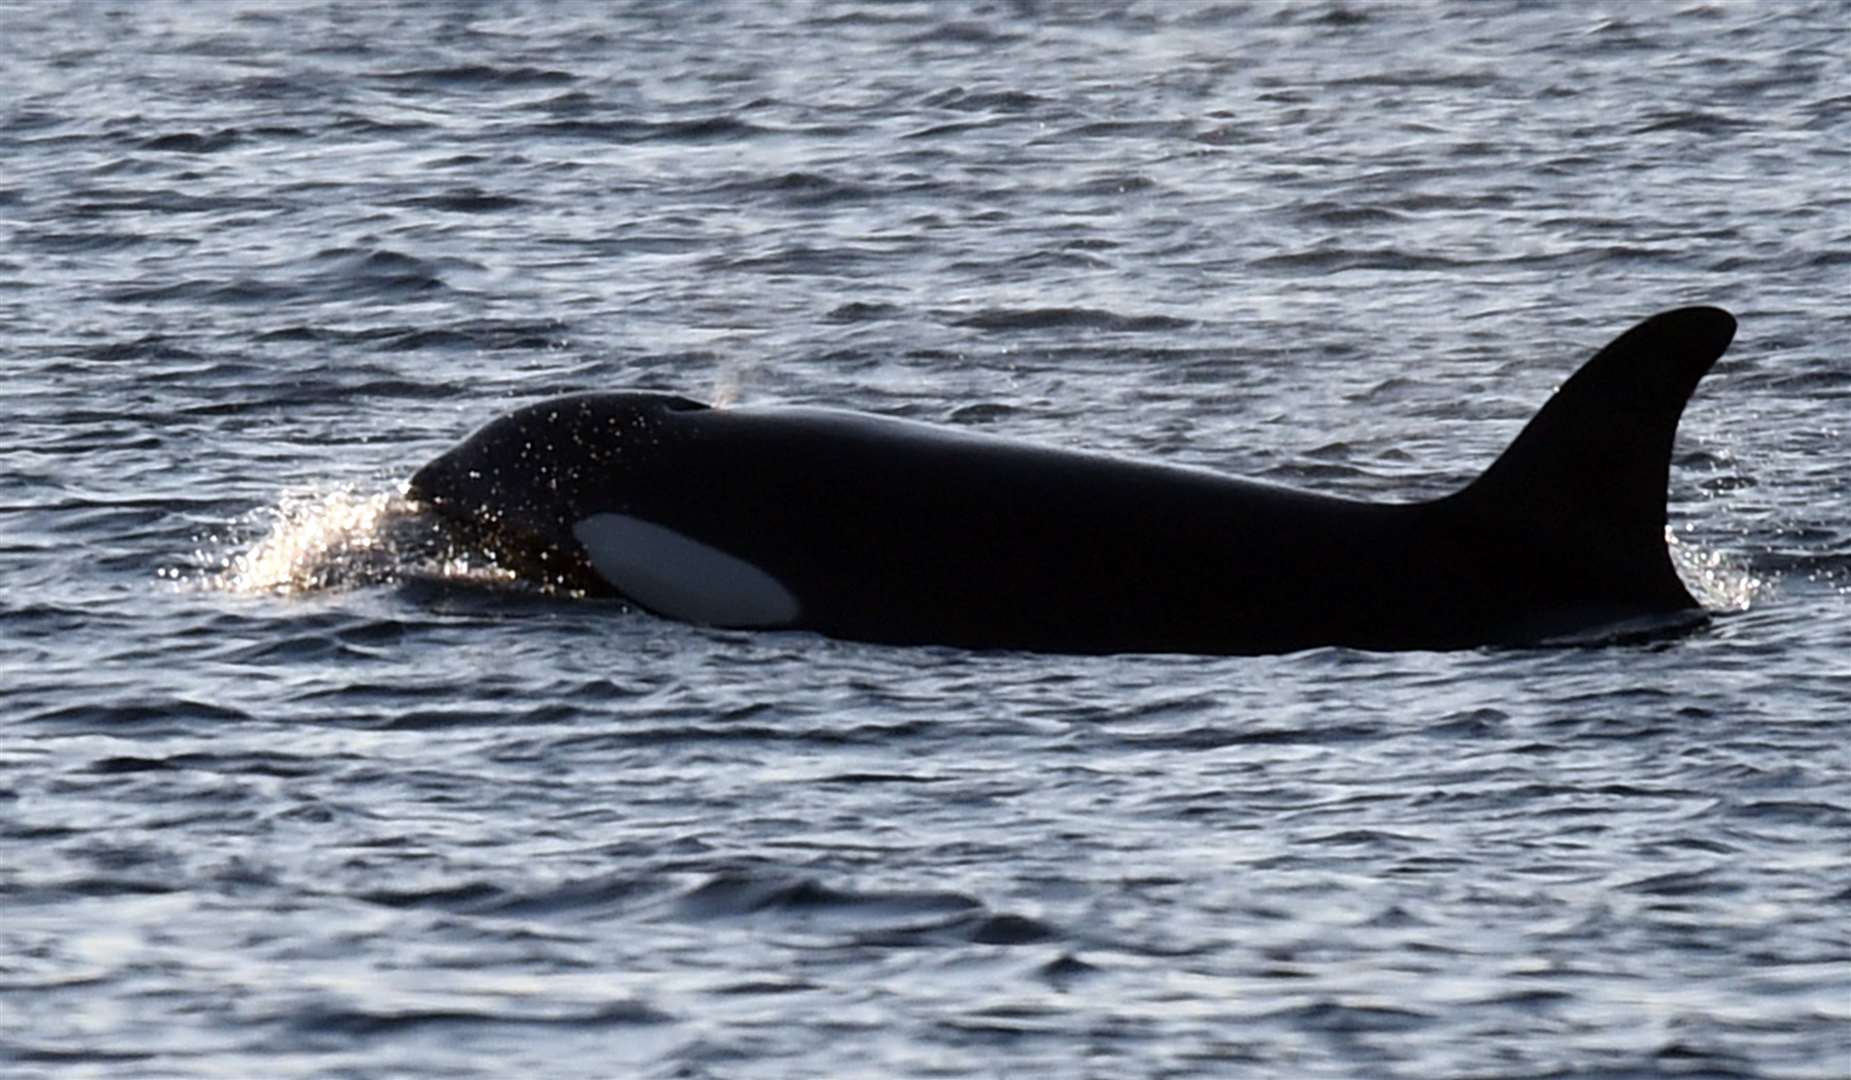 Orca were also spotted in Thurso bay last month.